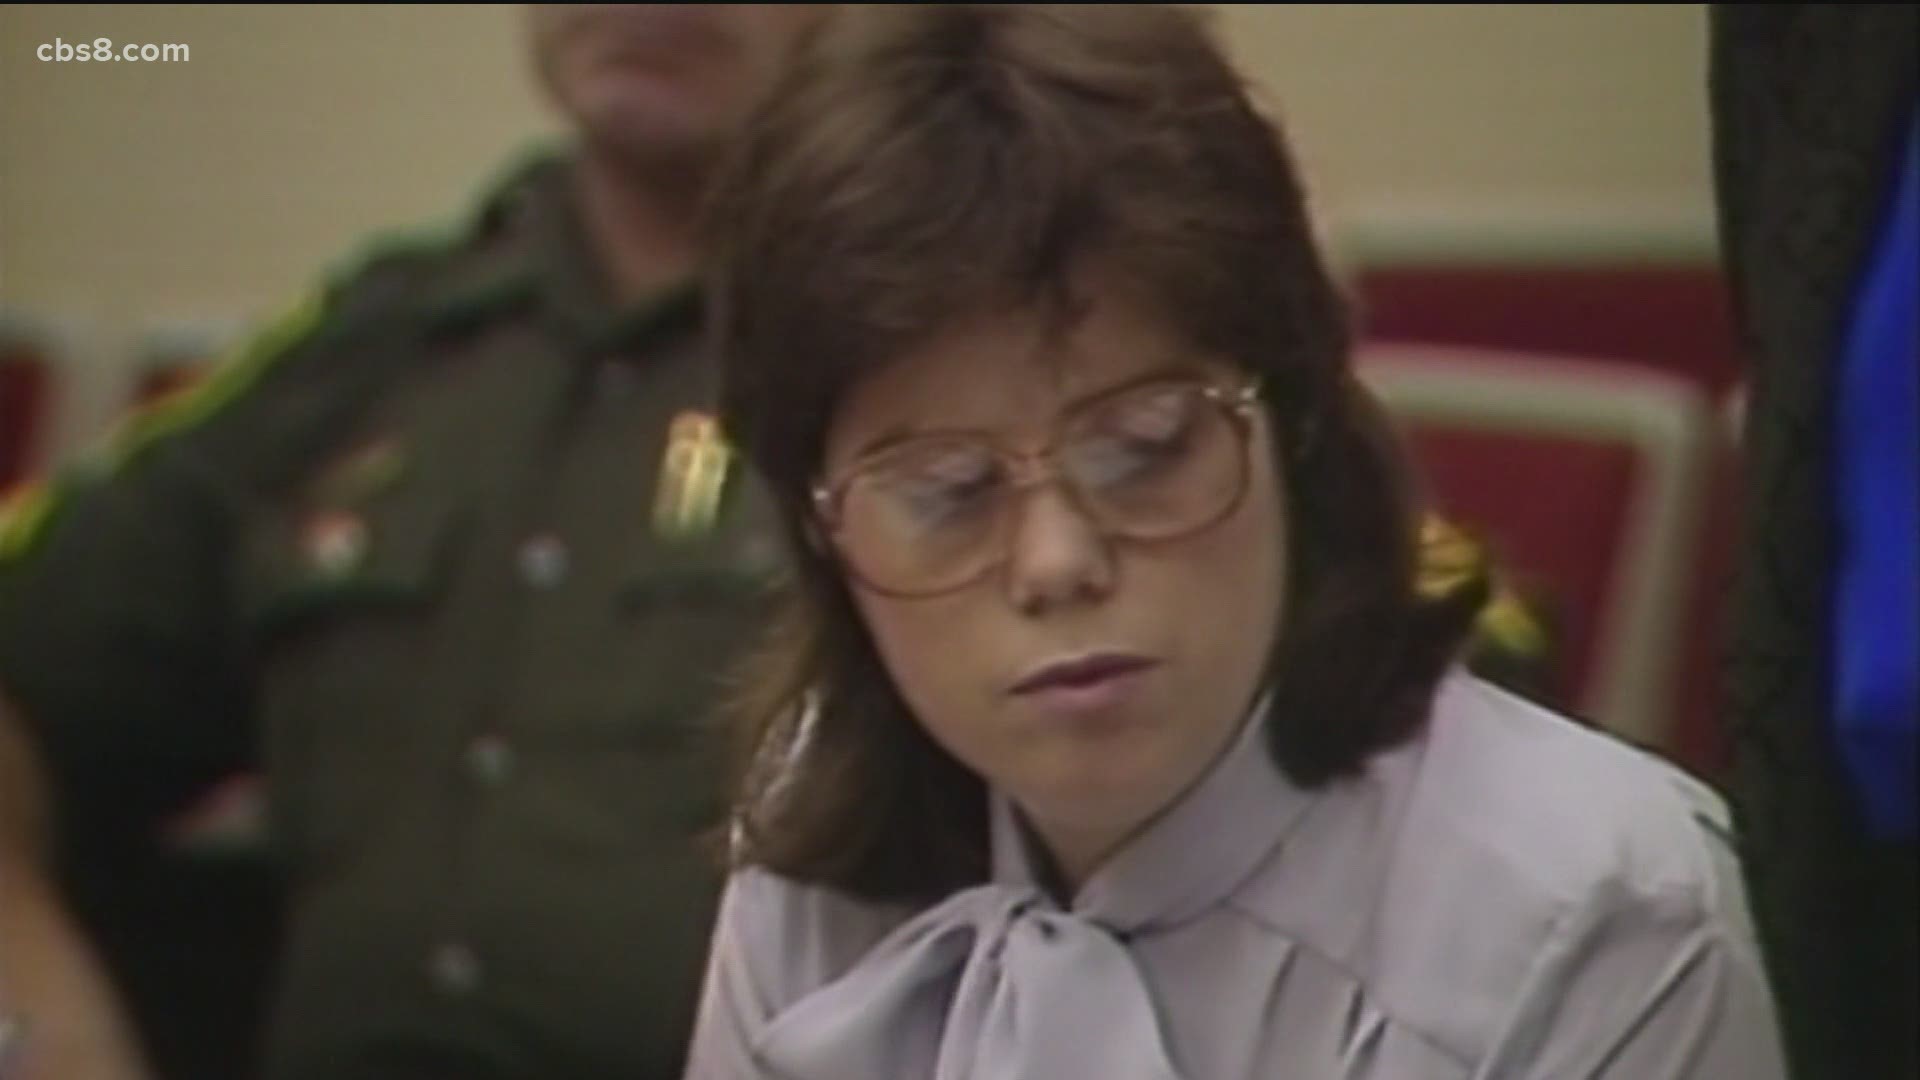 Laura Troiani denied certain aspects of her murder-for-hire plot against her husband.